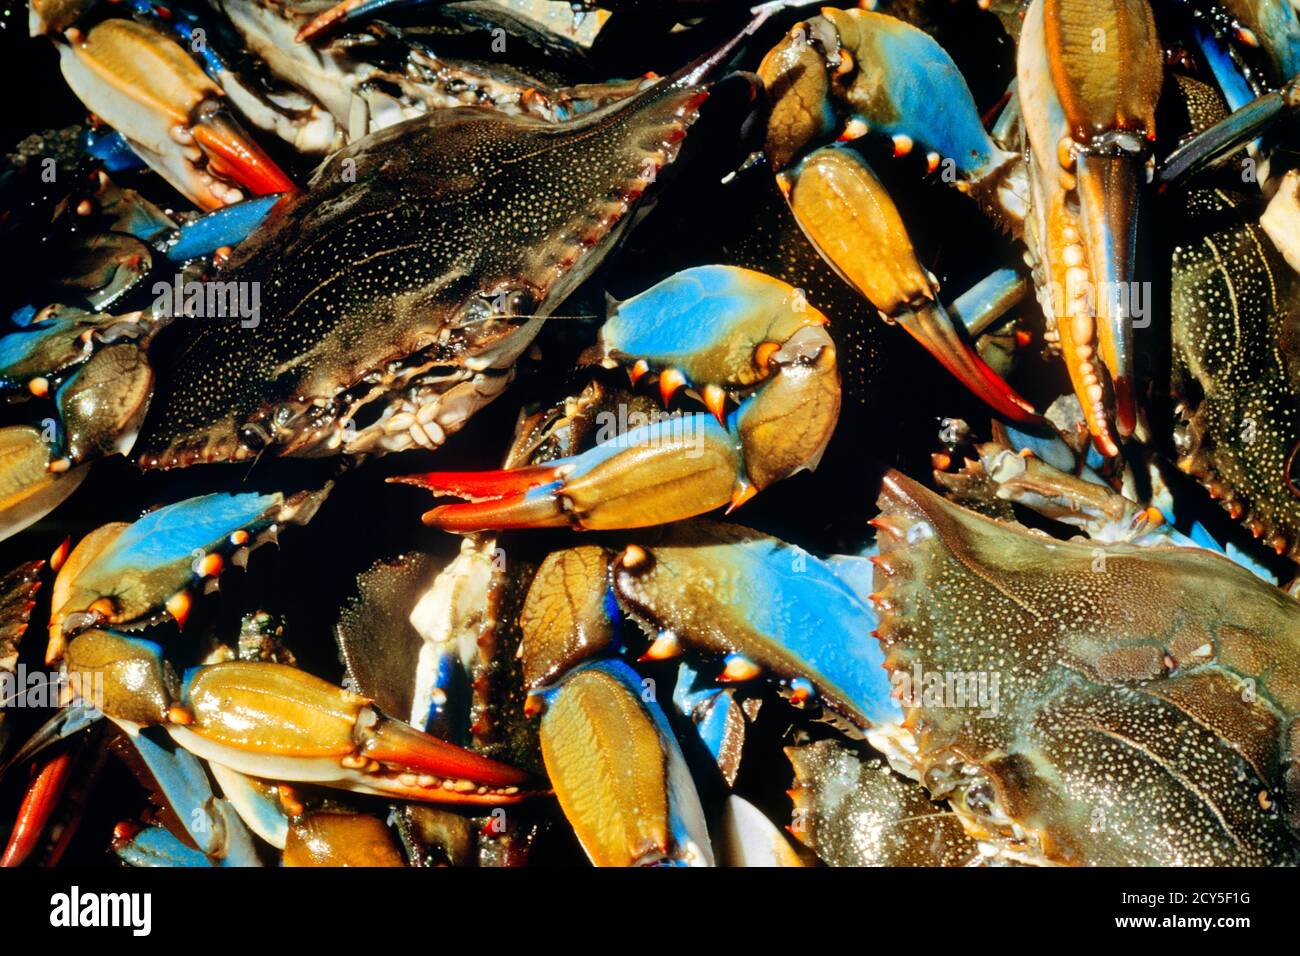 2000s GROUP OF BLUE CRABS Callinectes sapidus FOUND IN ATLANTIC AND GULF COAST REGIONS  - kz5151 MET001 HARS SEAFOOD Stock Photo